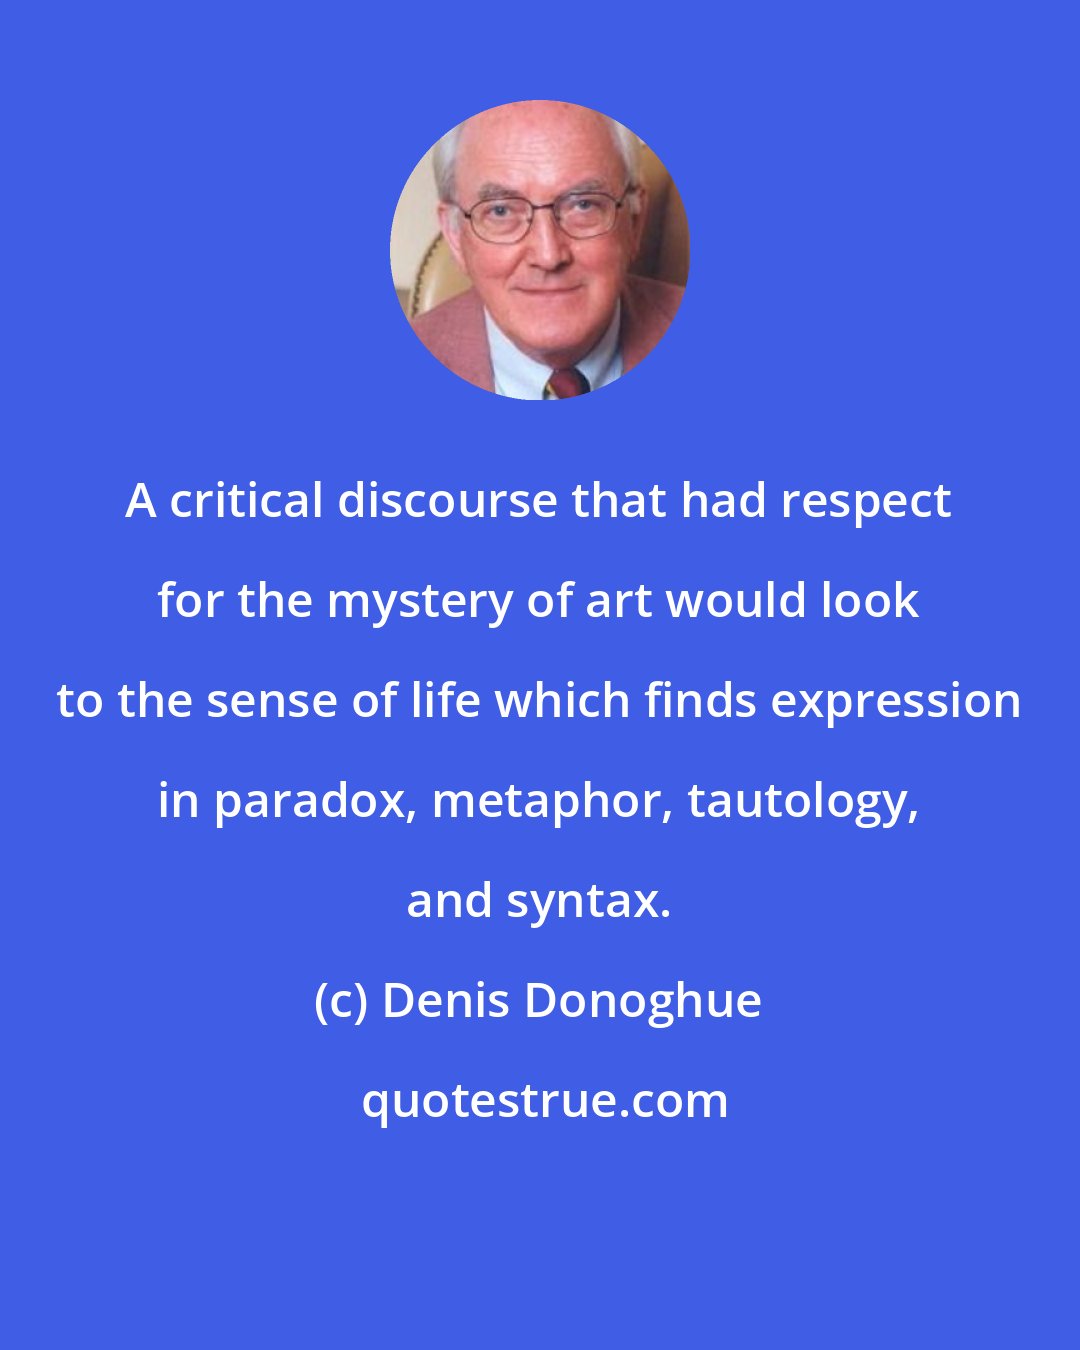 Denis Donoghue: A critical discourse that had respect for the mystery of art would look to the sense of life which finds expression in paradox, metaphor, tautology, and syntax.